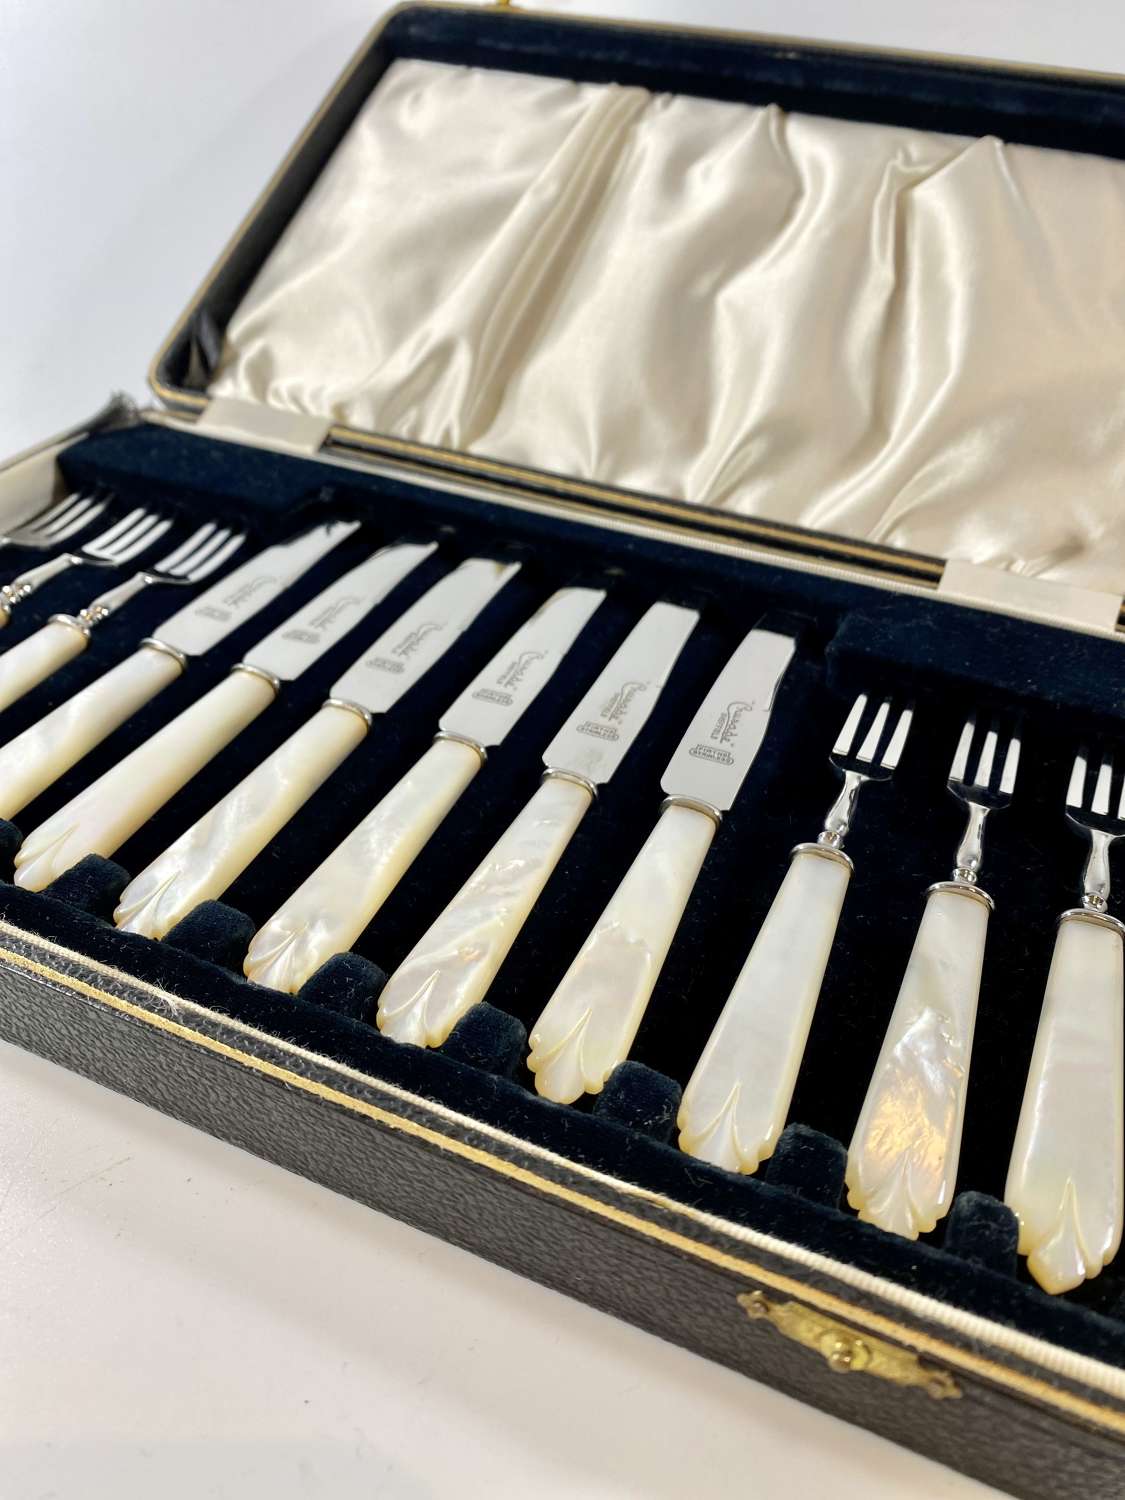 Boxed set of Art Deco carved mother of pearl handled cutlery set